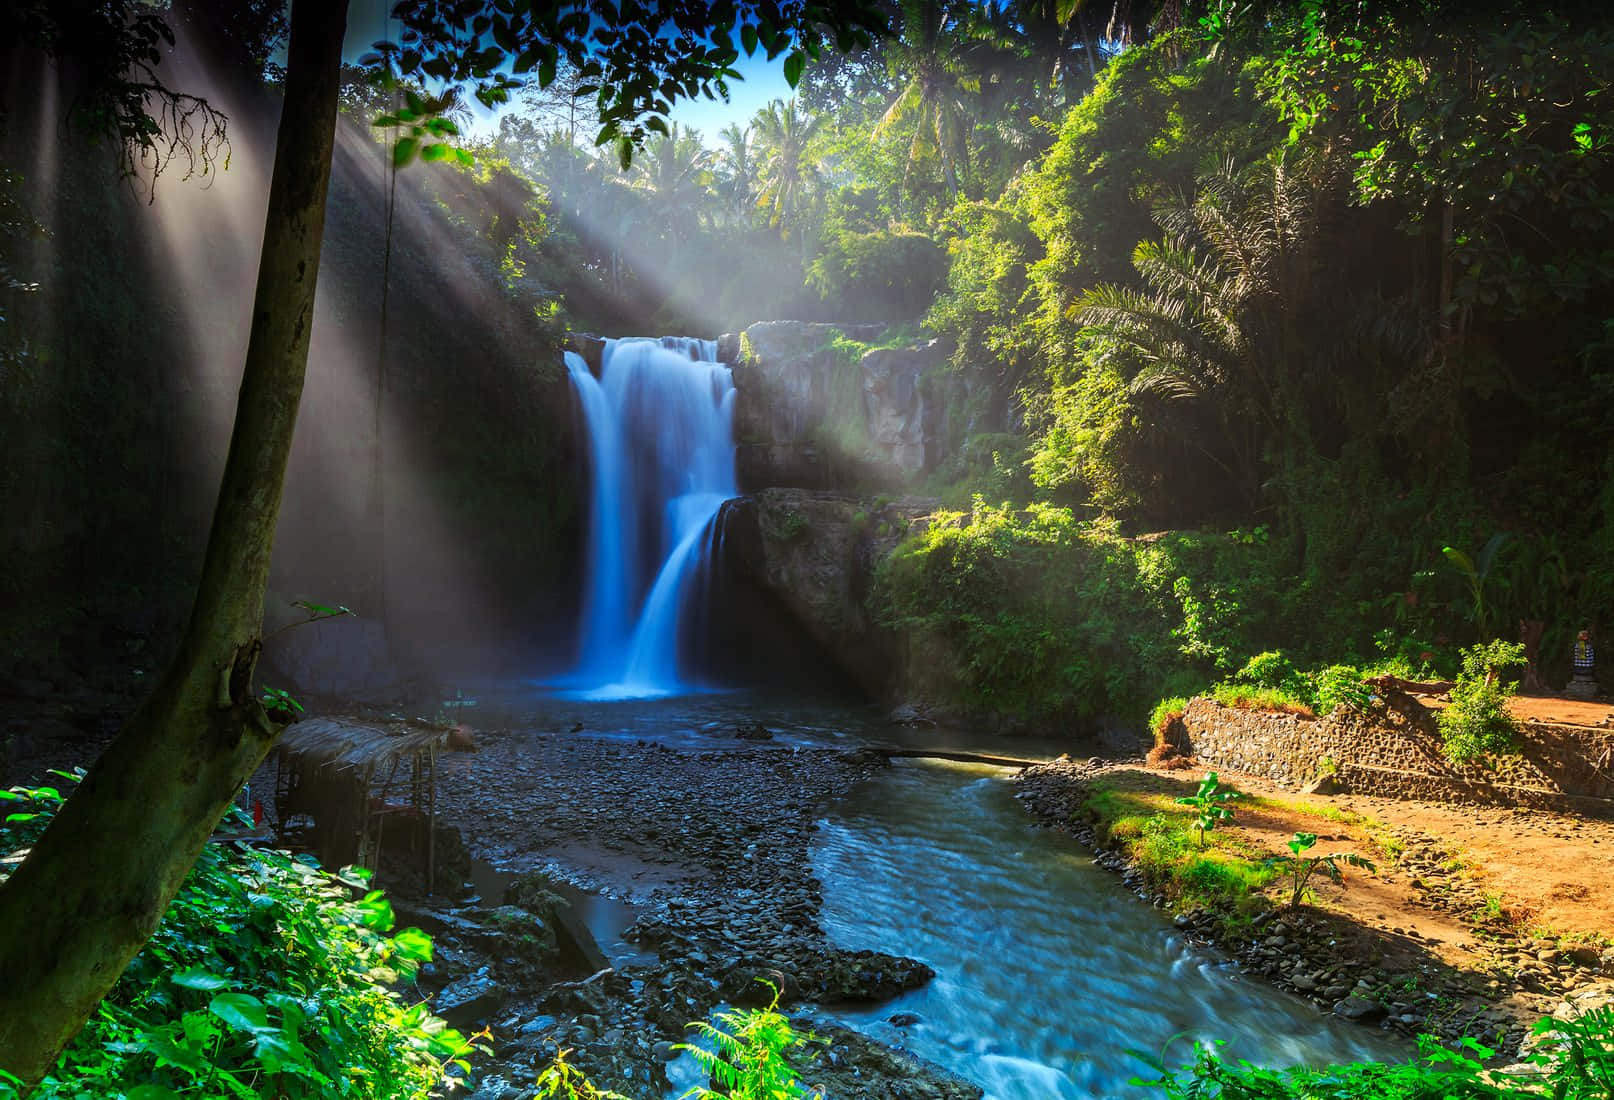 Enjoy the beauty of the peaceful waterfall scenery